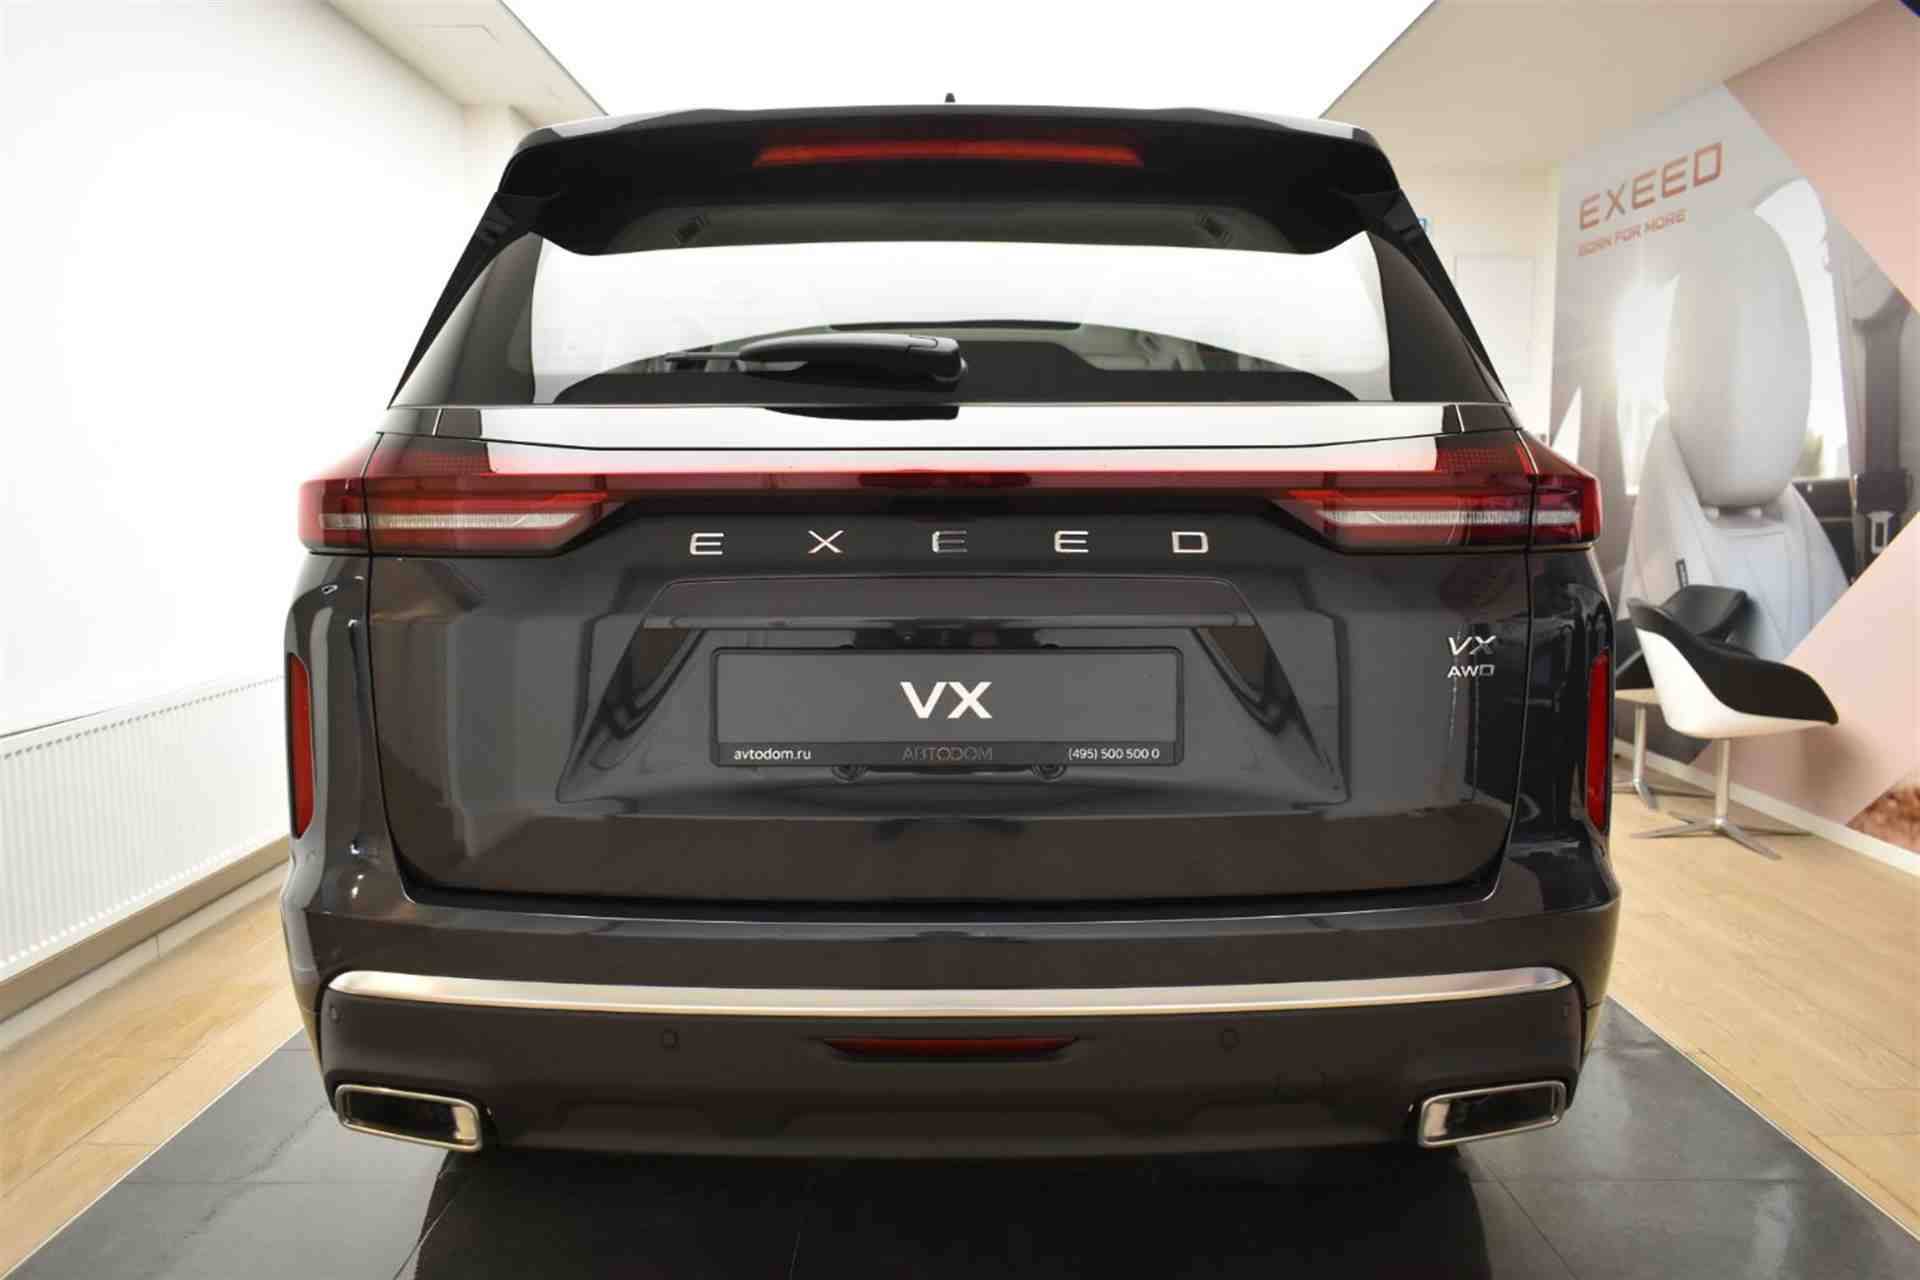 EXEED VX President 2.0T 7DCT 4WD